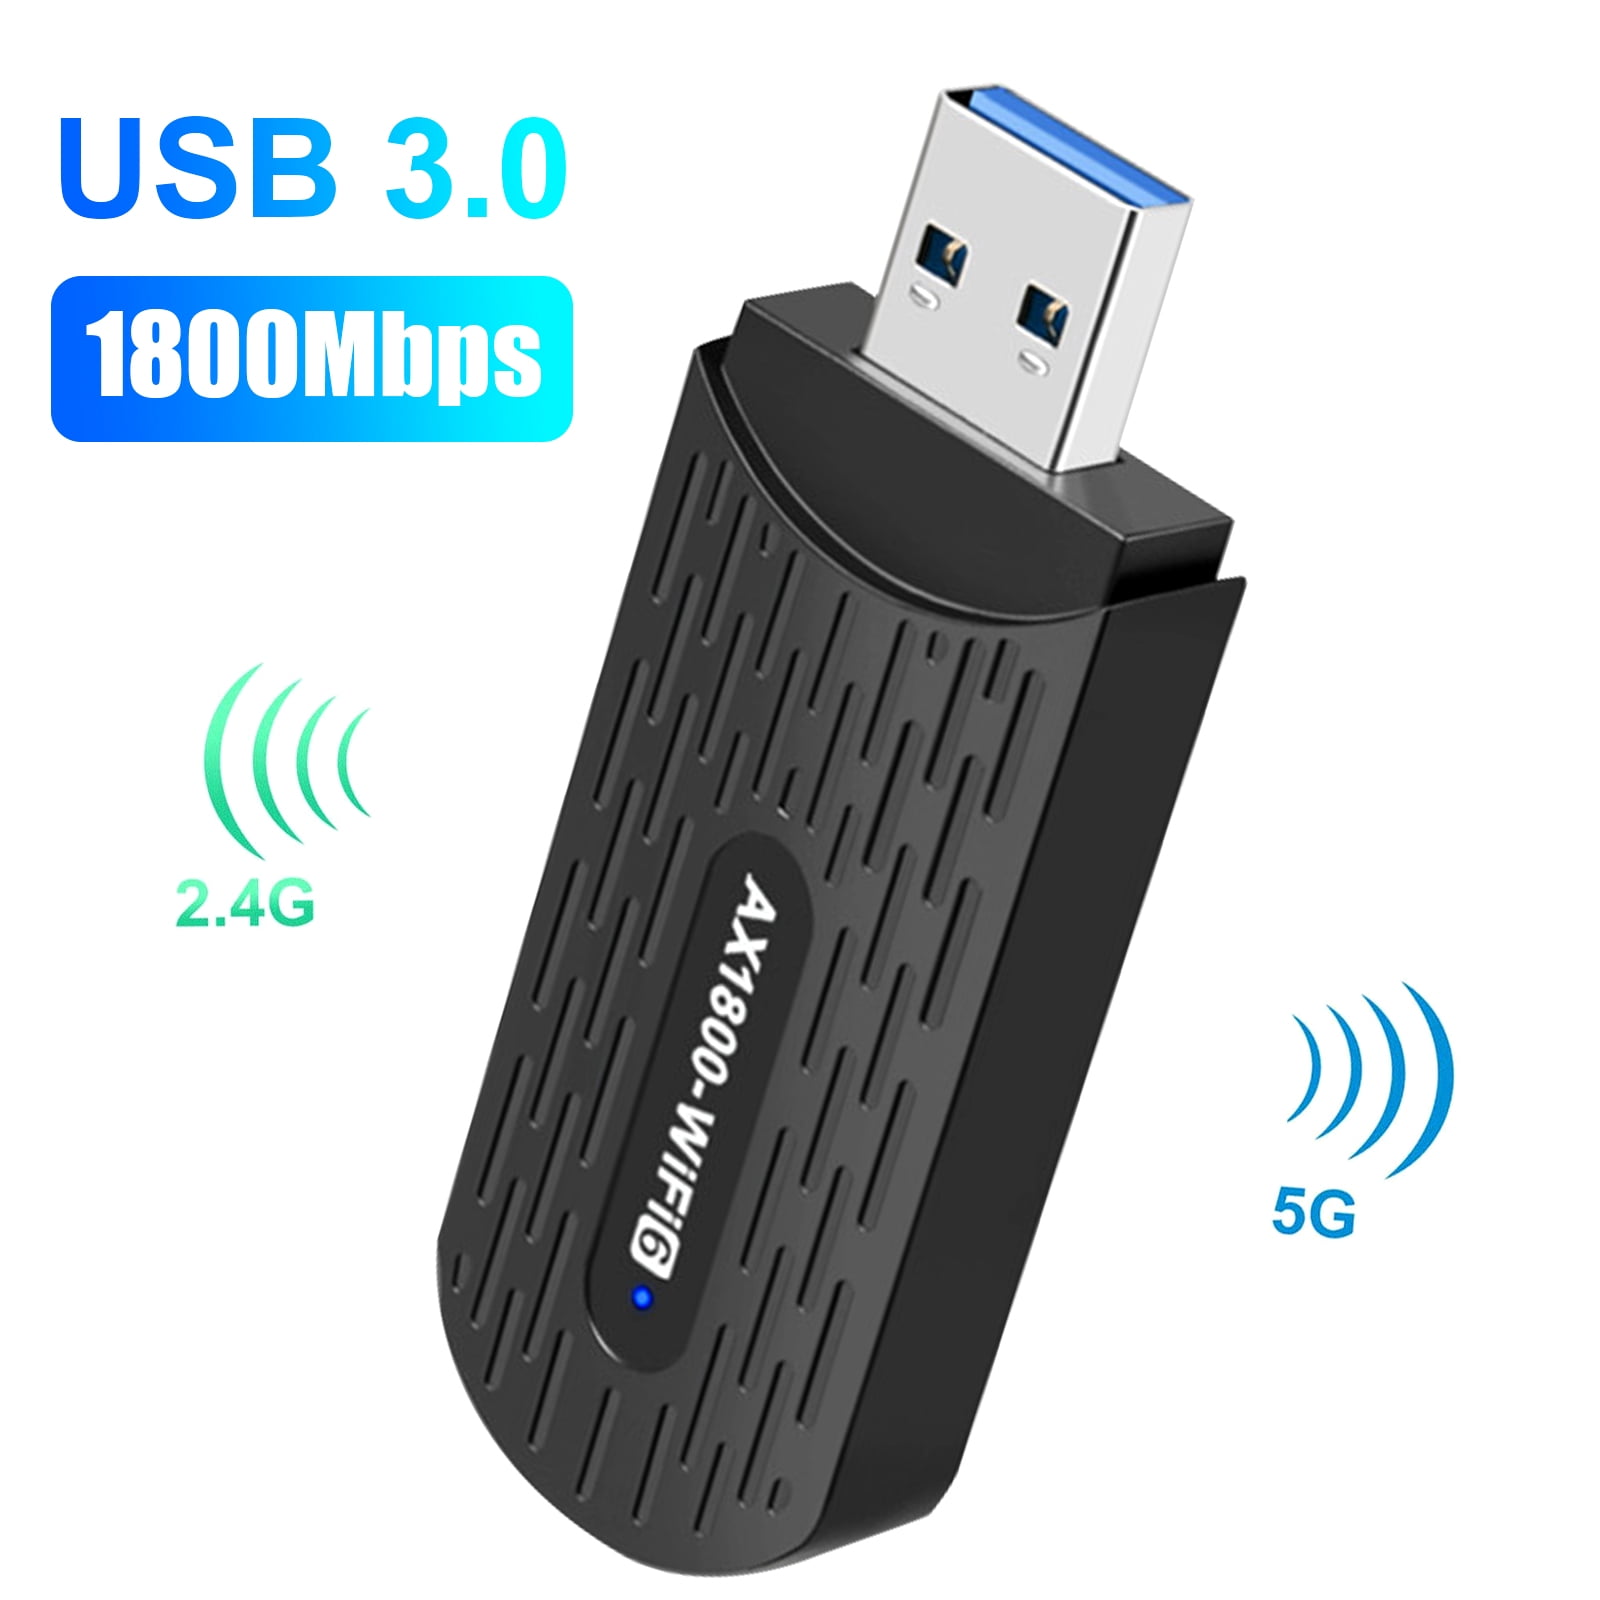 Adaptador USB y Dongle Wifi para PC – ugee Official Store